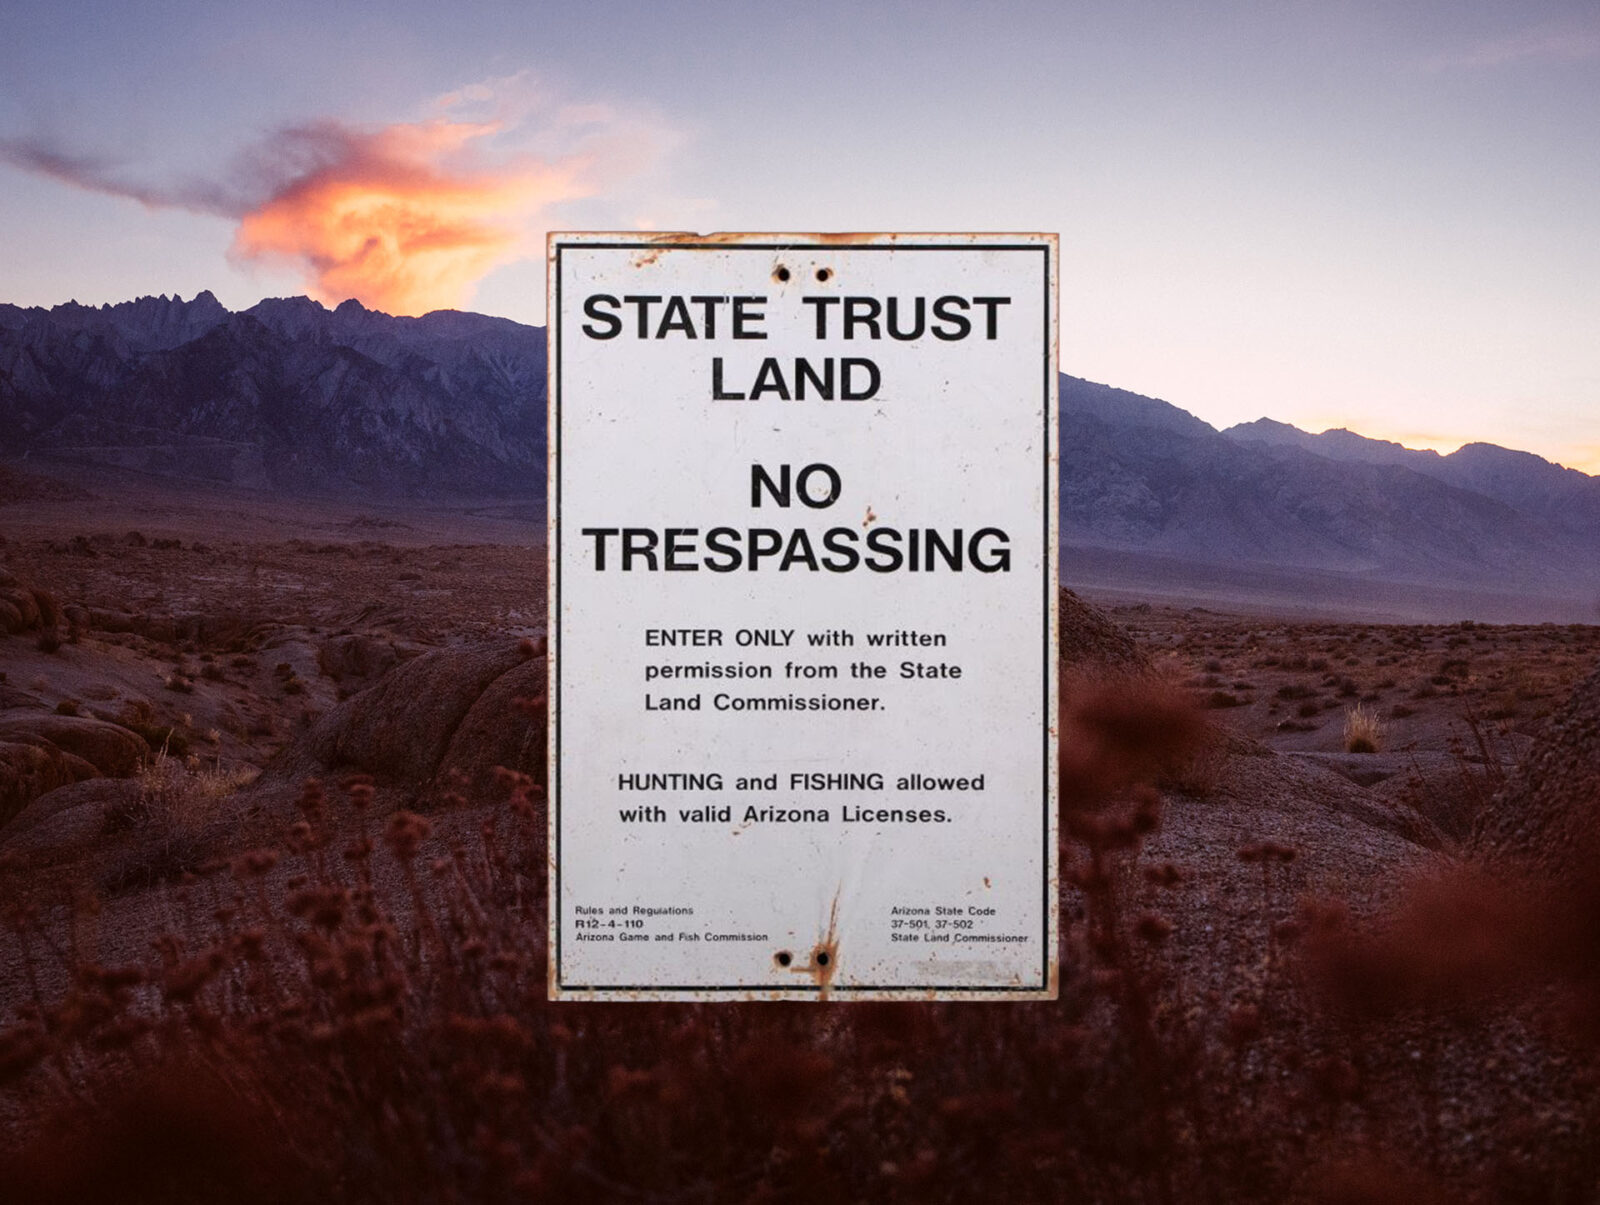 BLM land sign saying no trespassing except for hunting and fishing with a license. 